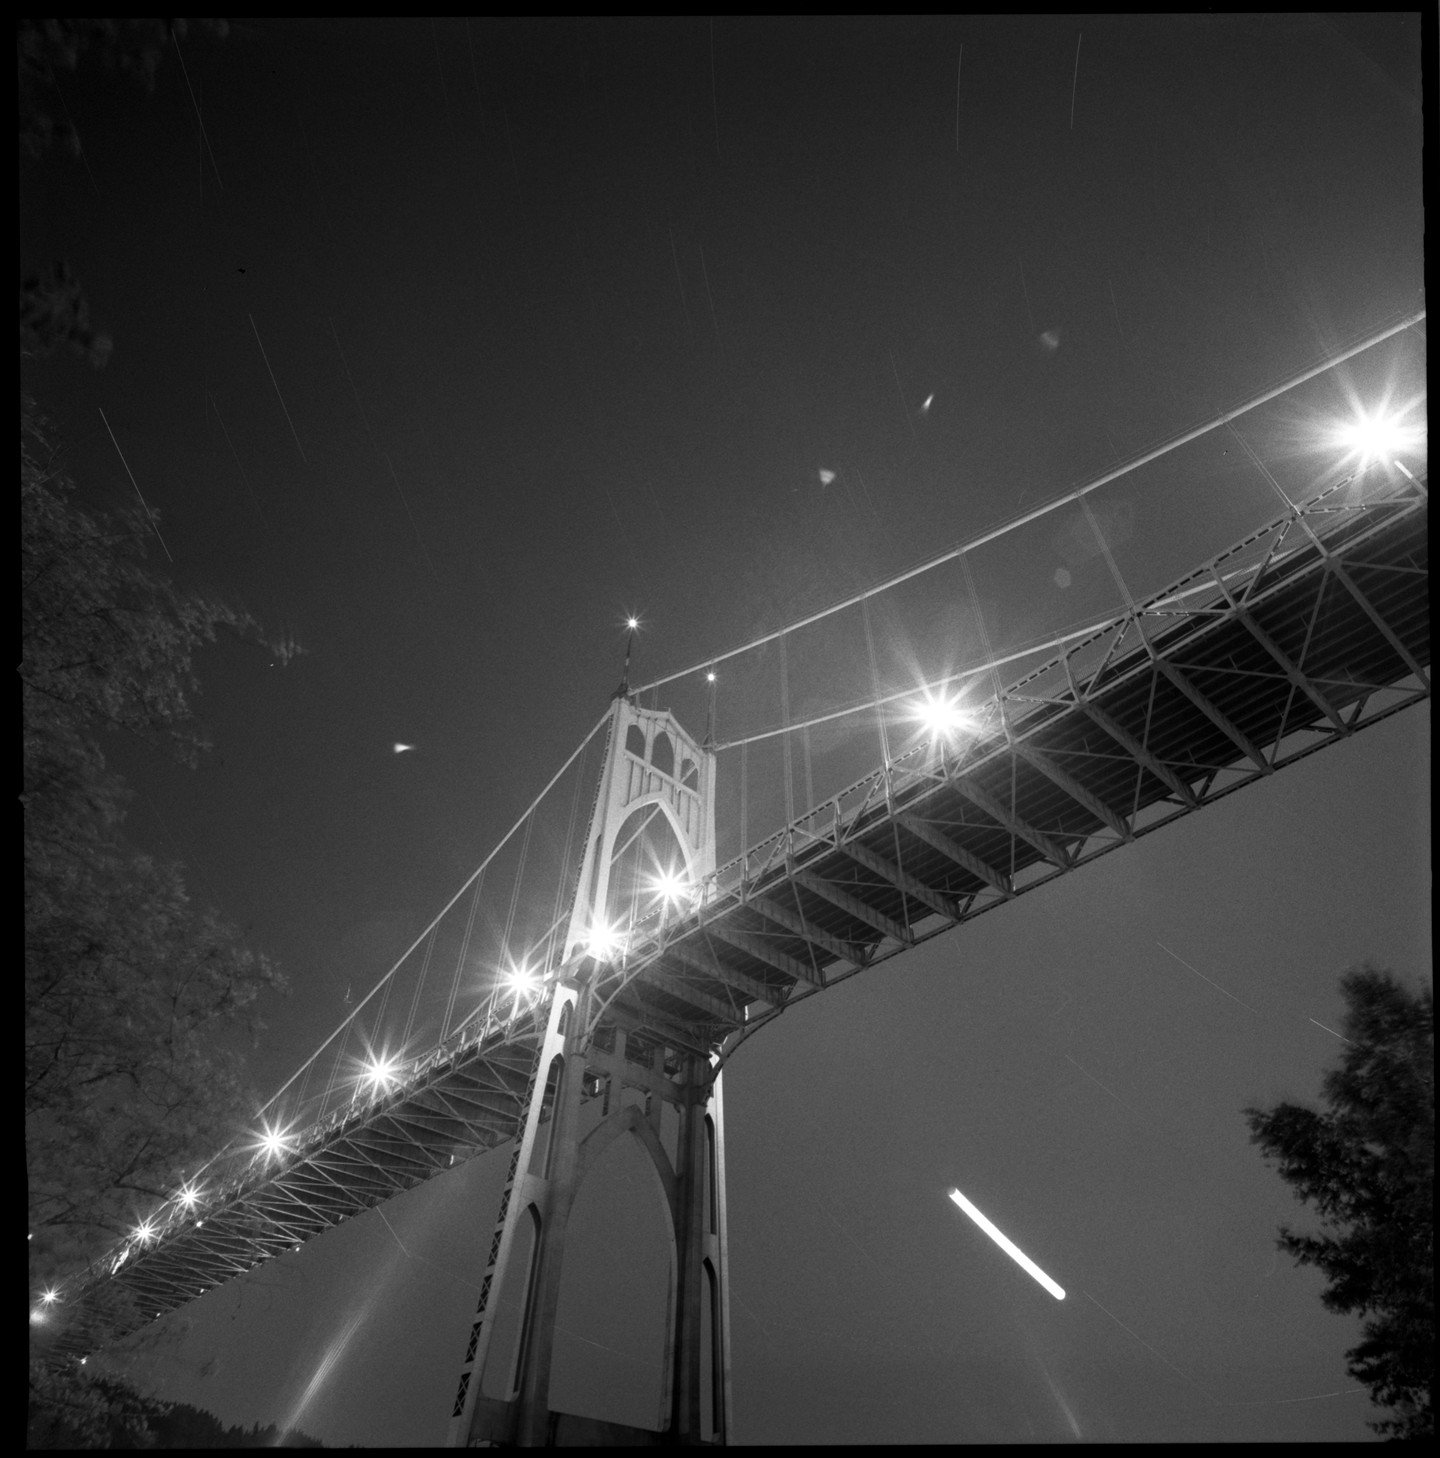 One hour exposure on a clear night. Getting a balance between the stars and the bright lights of the bridge was a bit of a tough needle to thread but it worked out ok in the end. 
.
#filmphotography #landscape #cityscape #portland #pdx #bridge #hasse